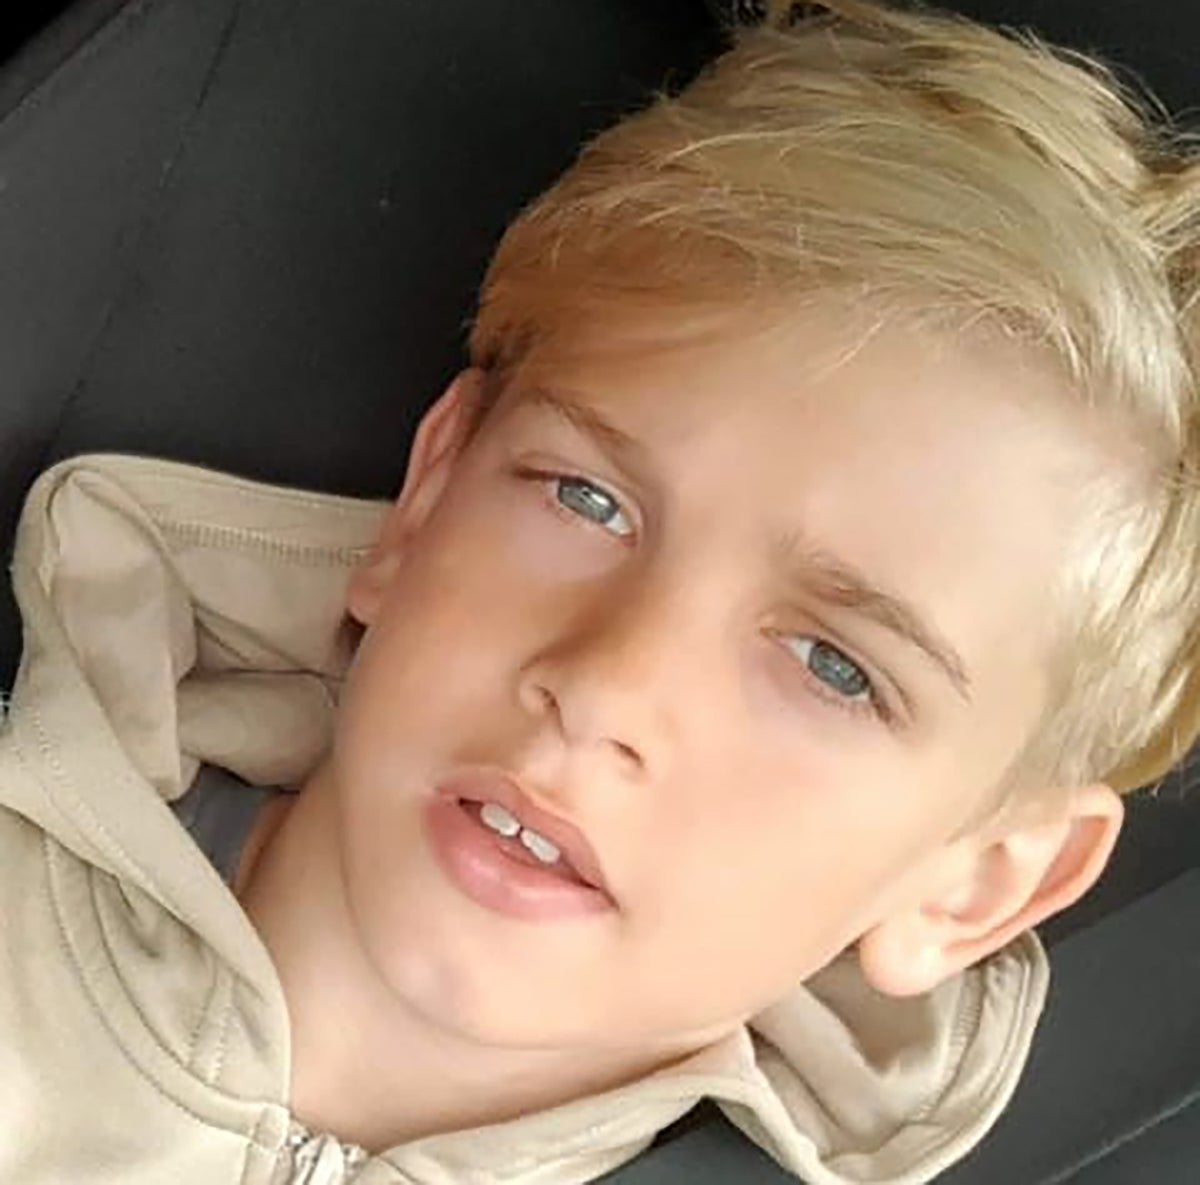 Archie Battersbee: Parents lose Supreme Court bid to keep son, 12, on life support